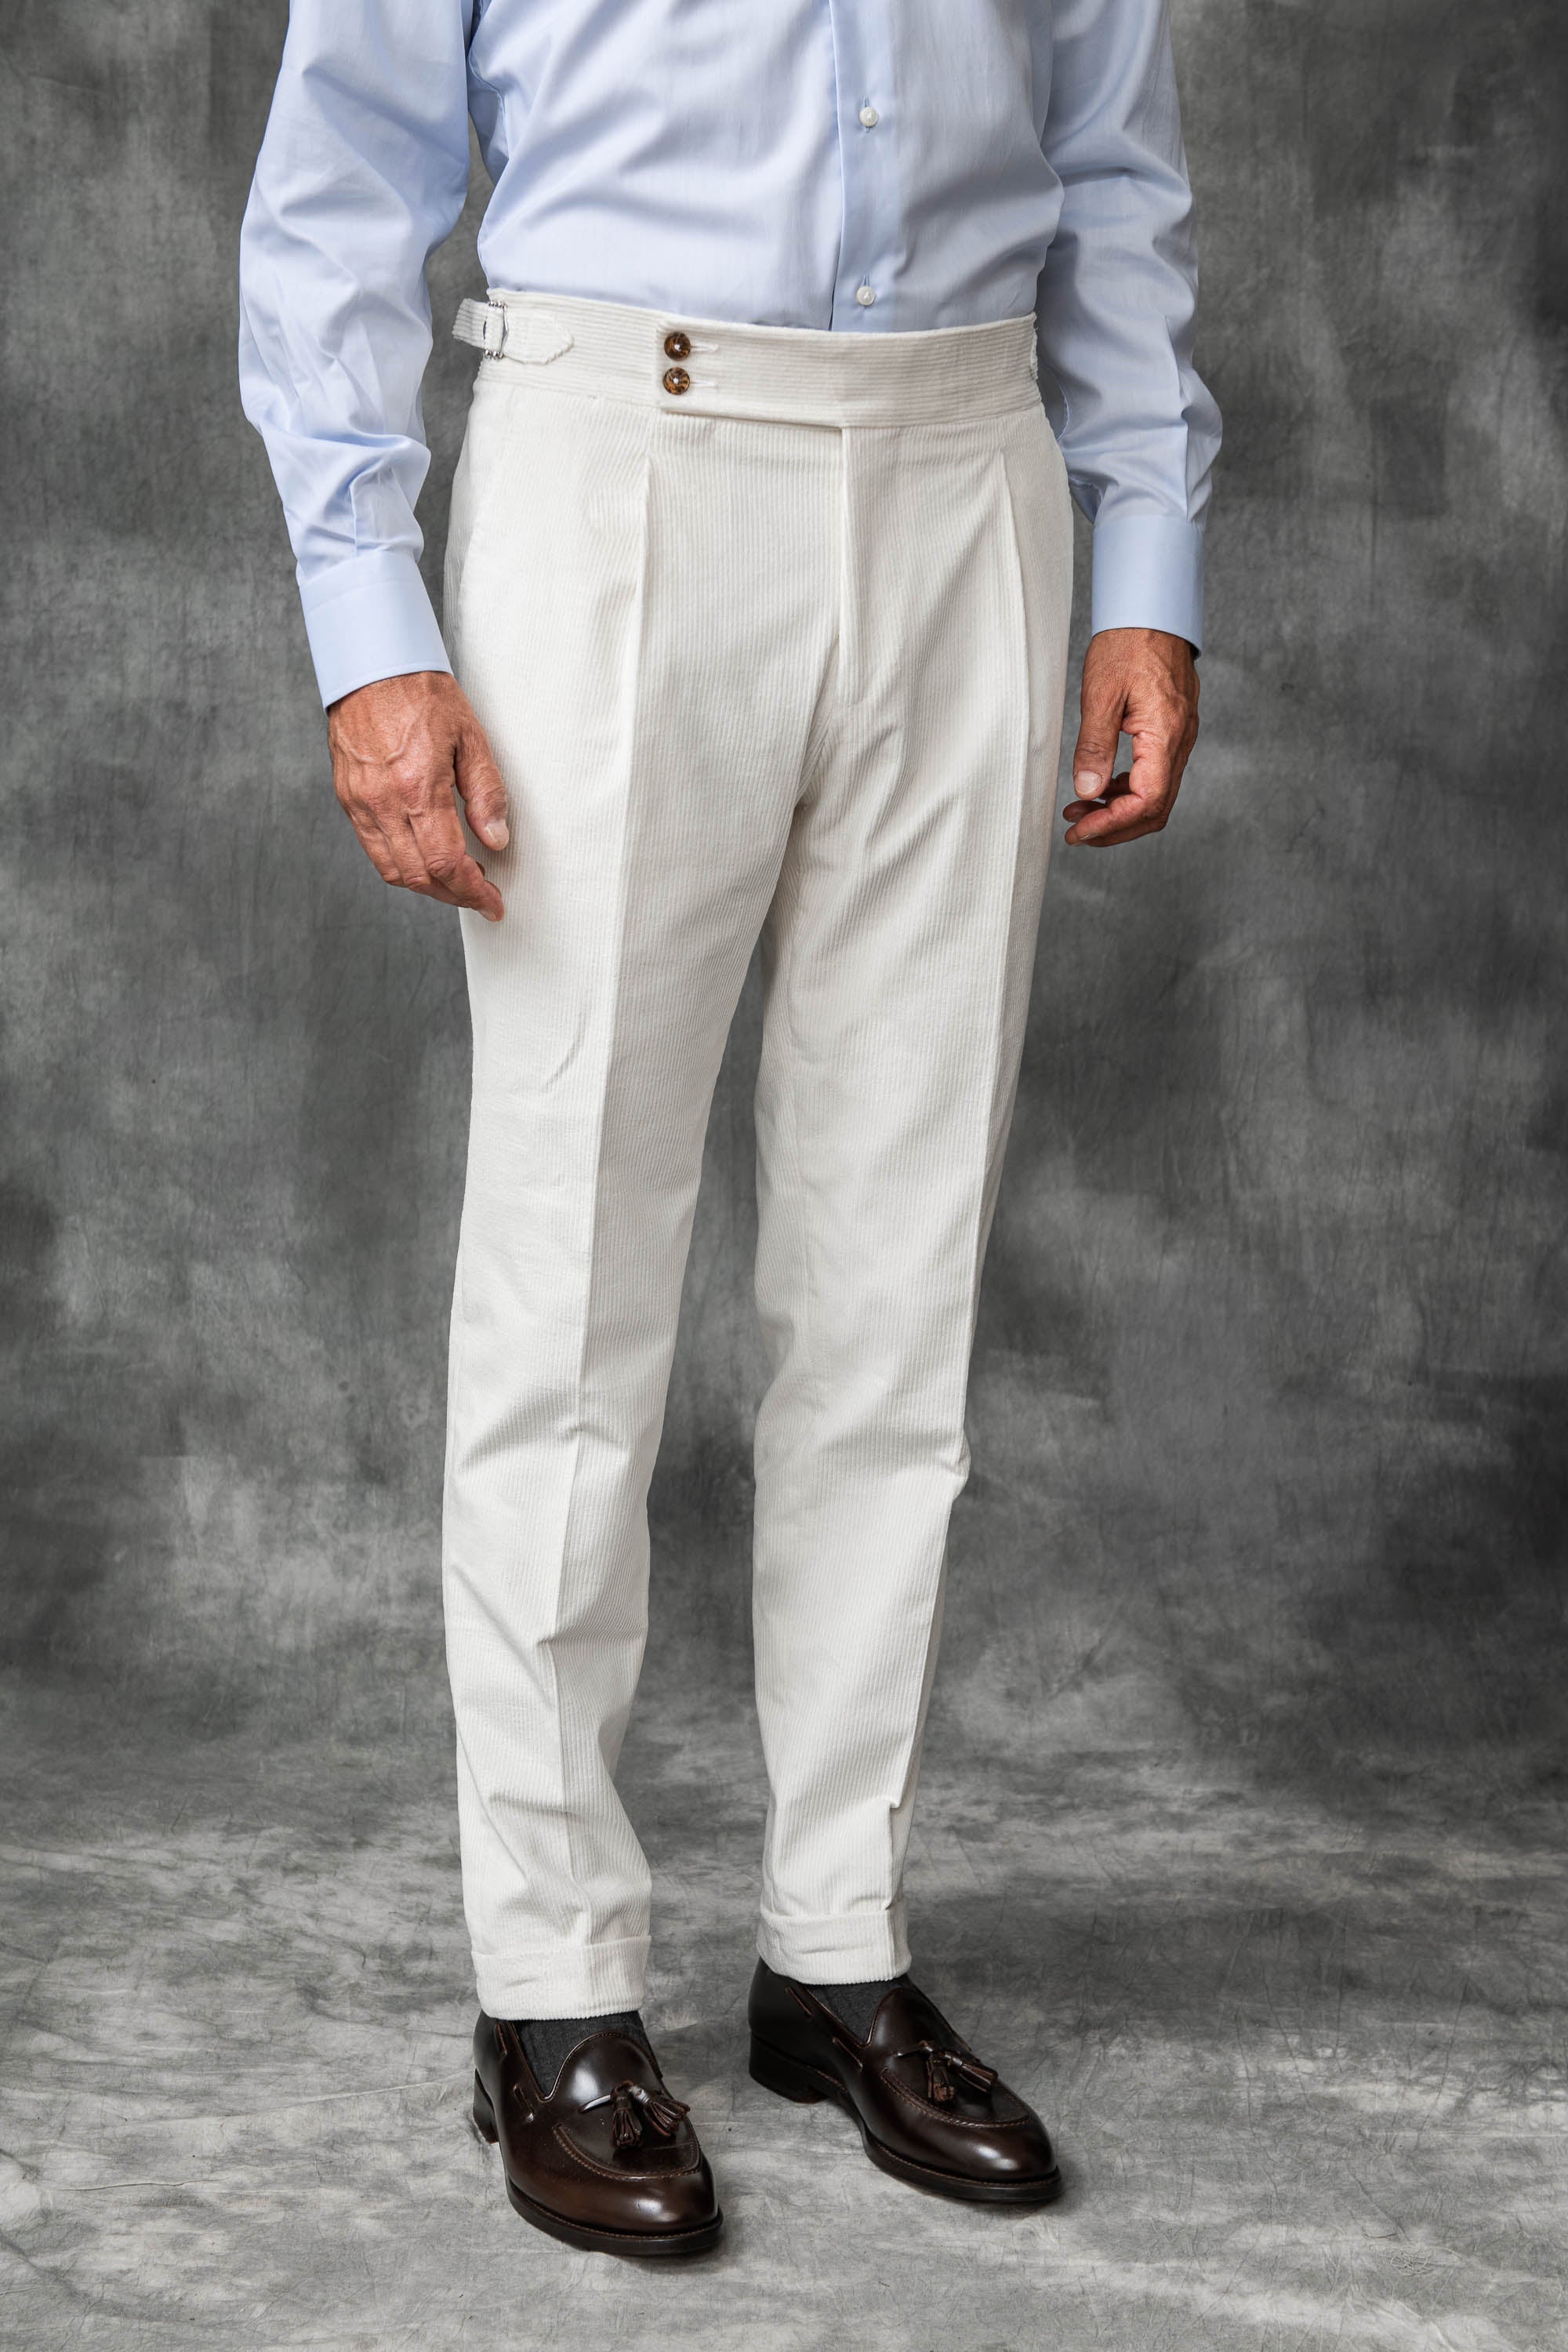 White corduroy trousers  "Soragna Capsule Collection" - Made in Italy